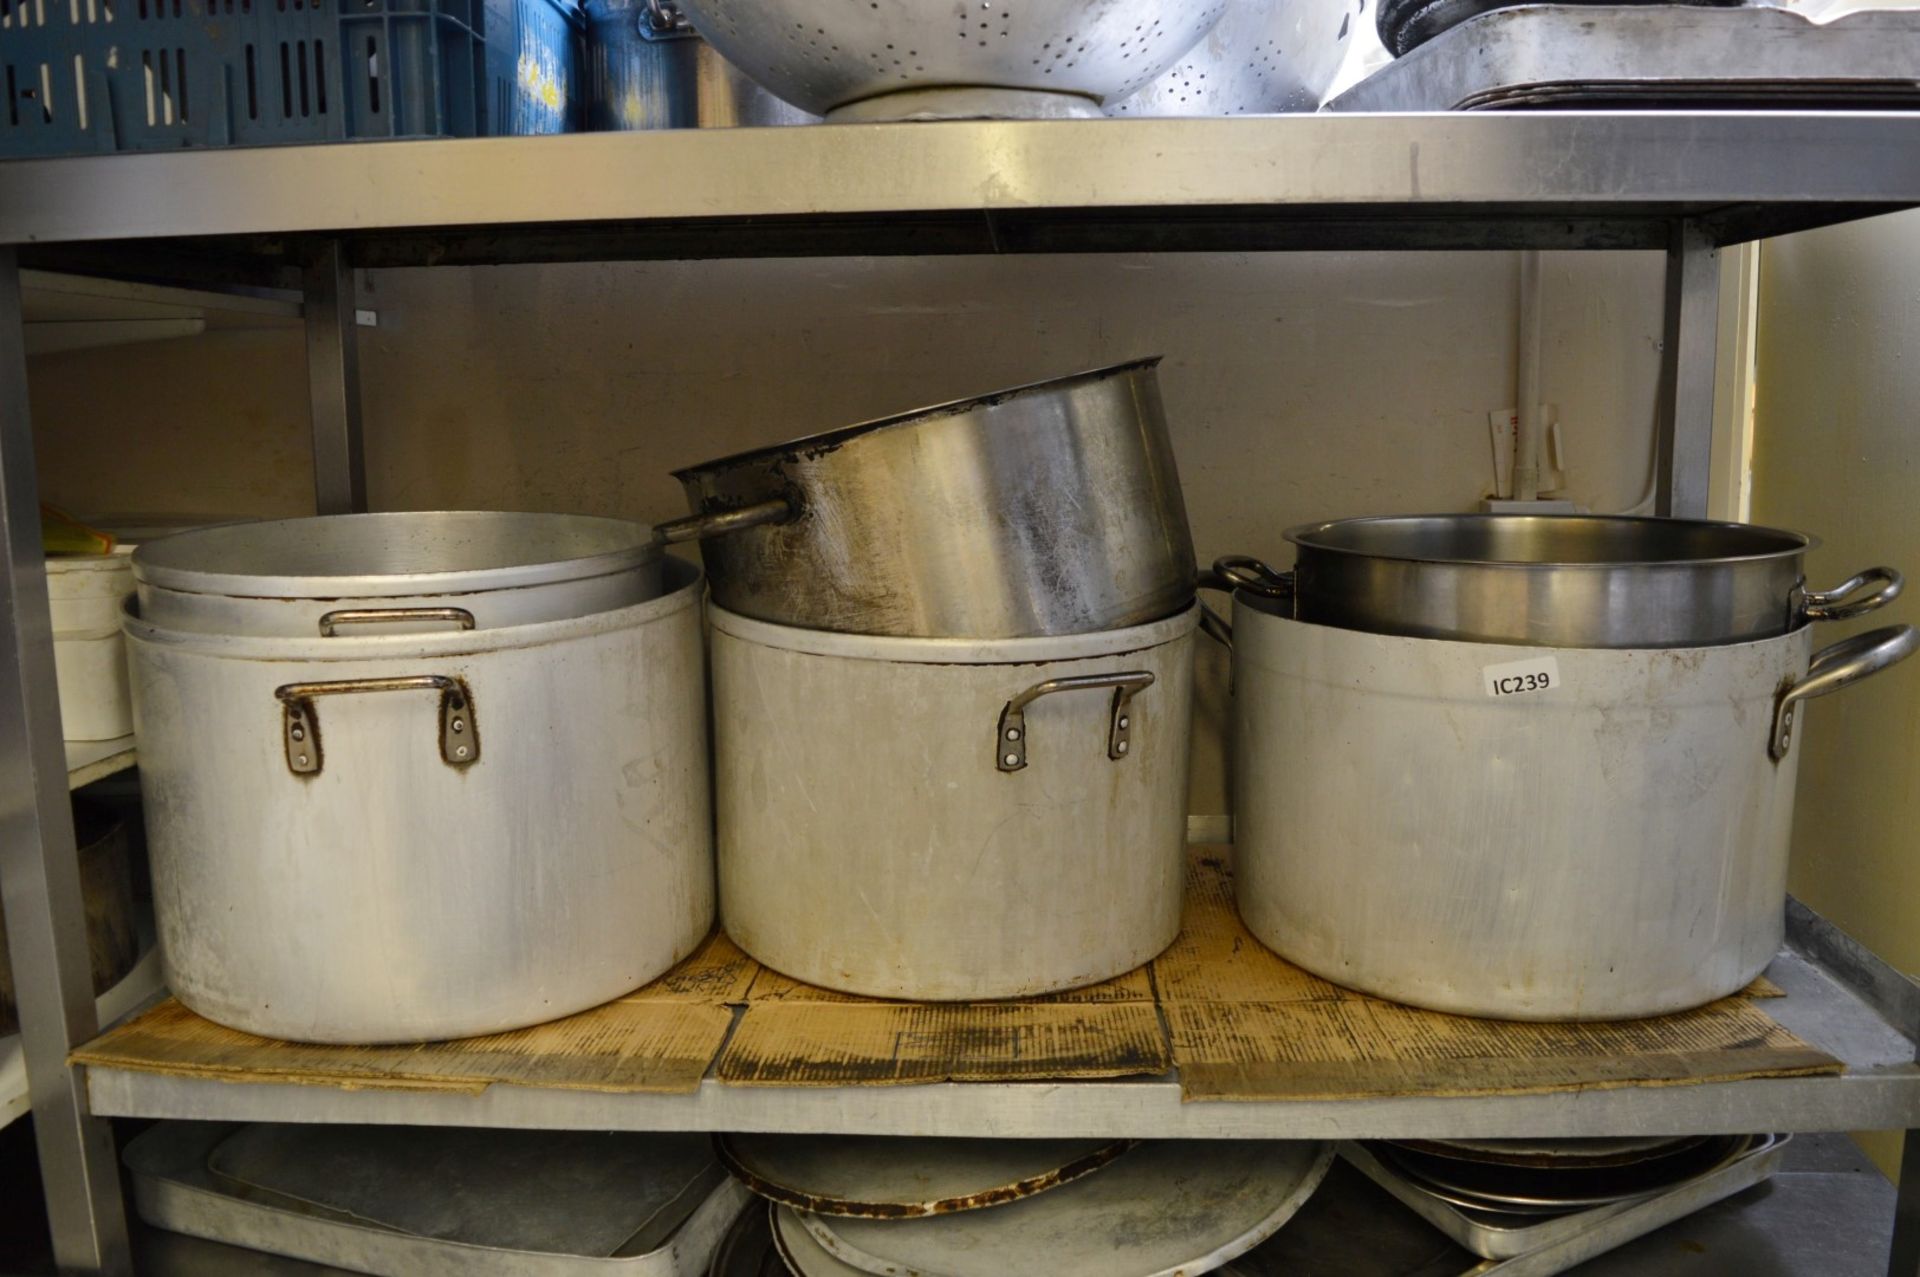 Approx 12 x Assorted Cooking Pans - Large Sizes - CL180 - Ref IC239 - Location: London EC3V - Image 2 of 7